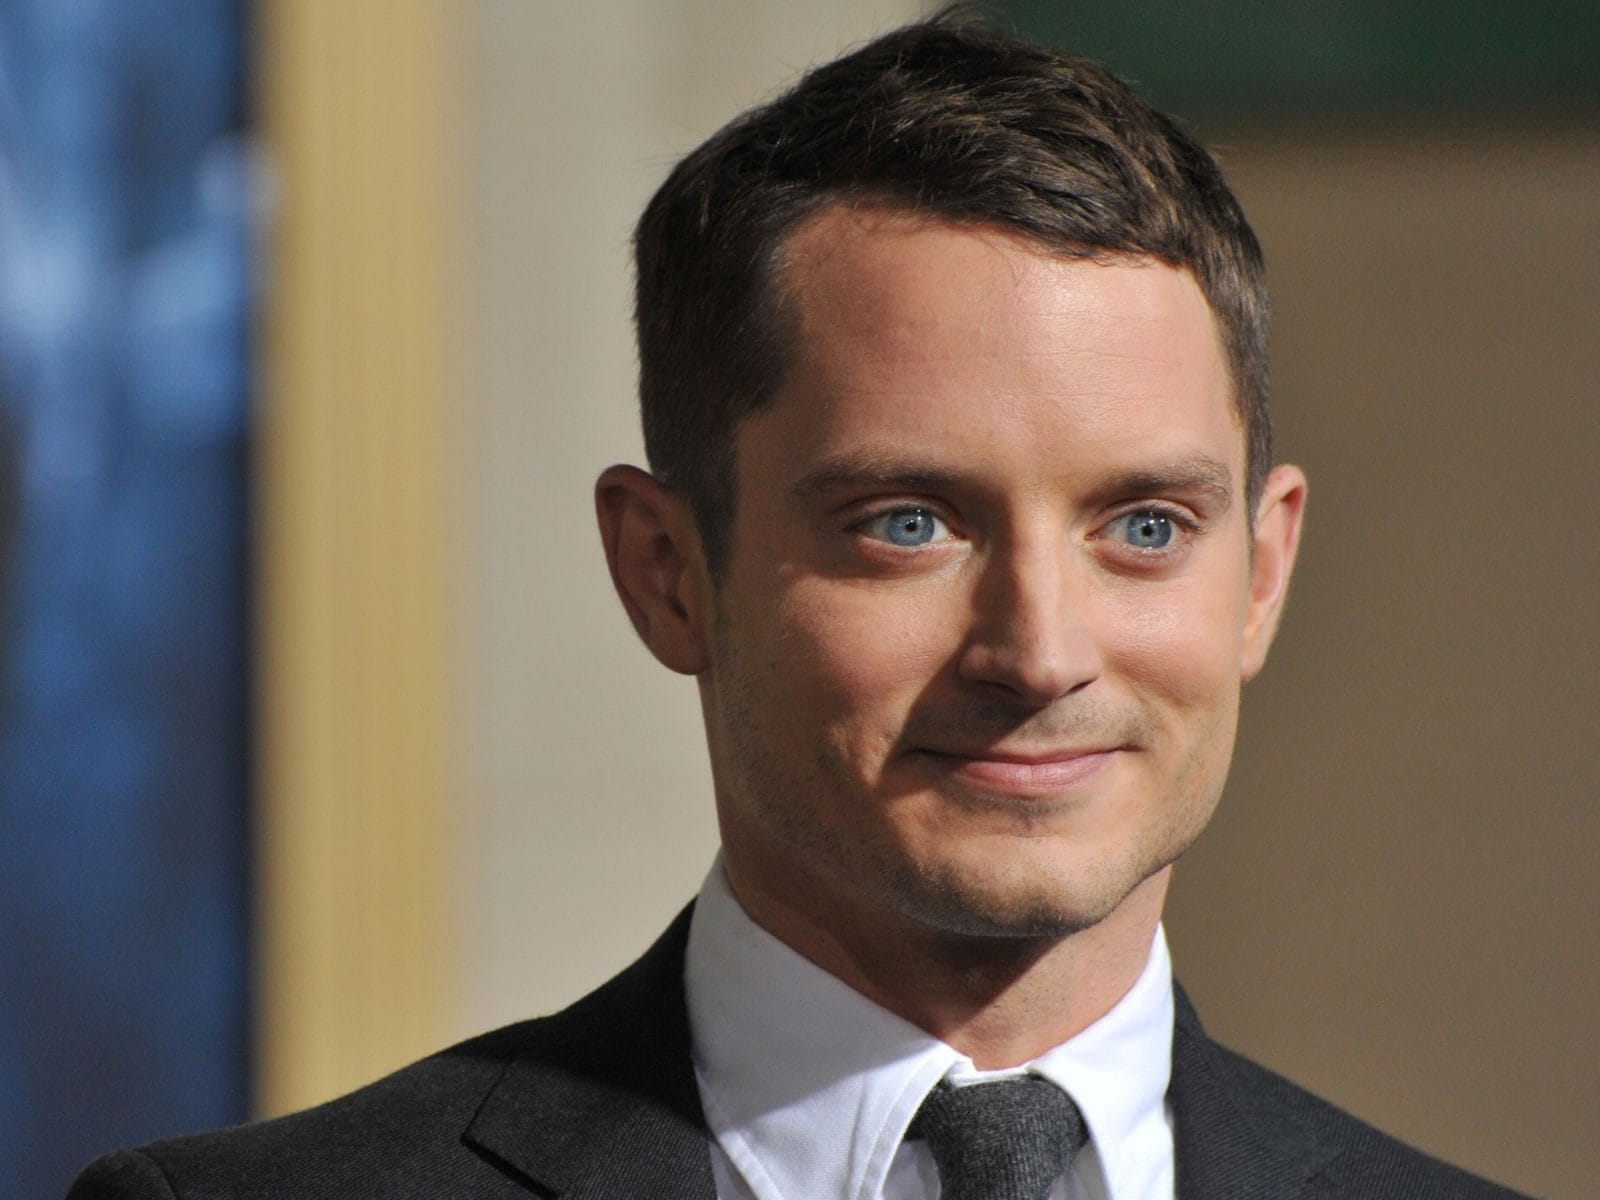 Elijah Wood on New Lord of the Rings Movies: I'm Surprised, Fascinated